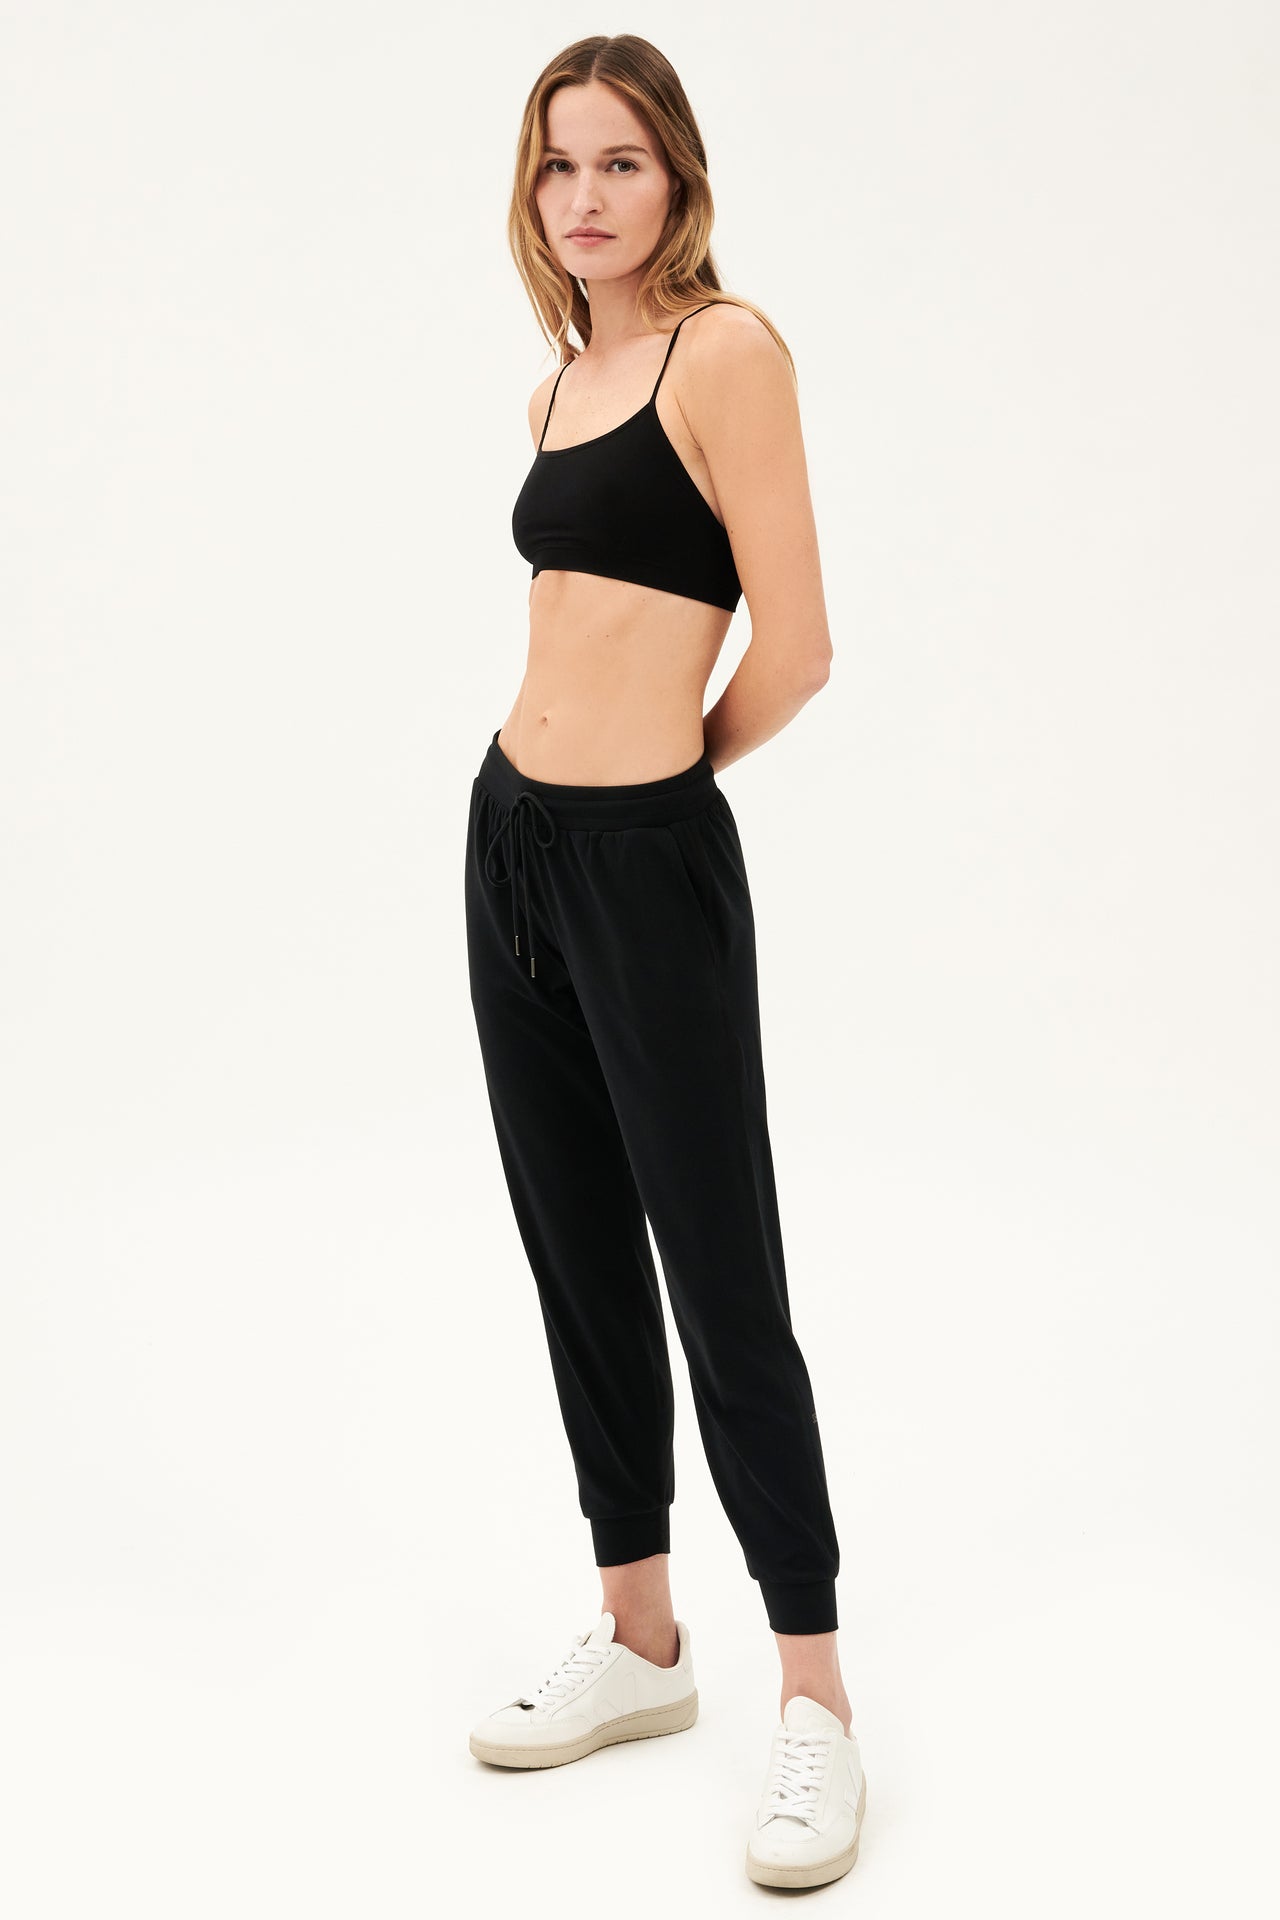 Full side view of girl wearing black sweatpants with black tie around waistband and a black sports bra with white shoes 